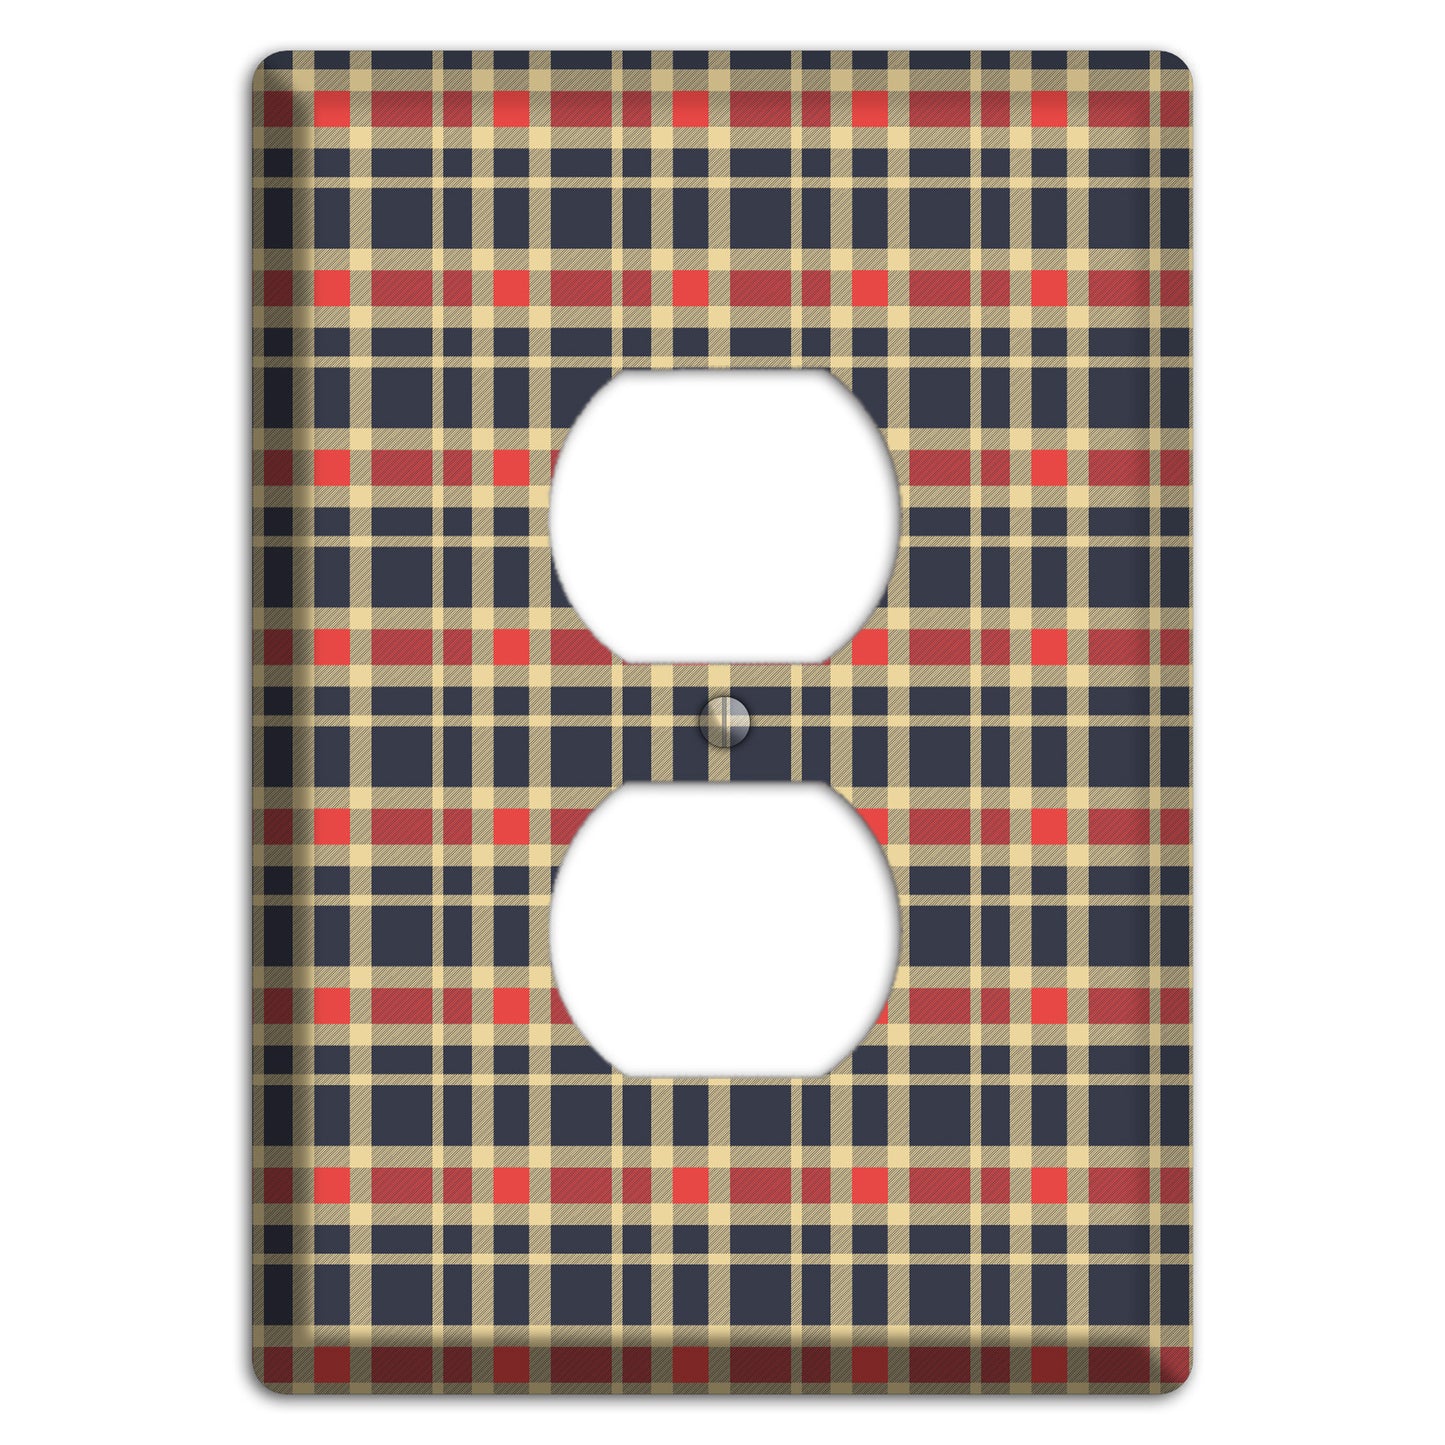 Maroon and Black Plaid 2 Duplex Outlet Wallplate